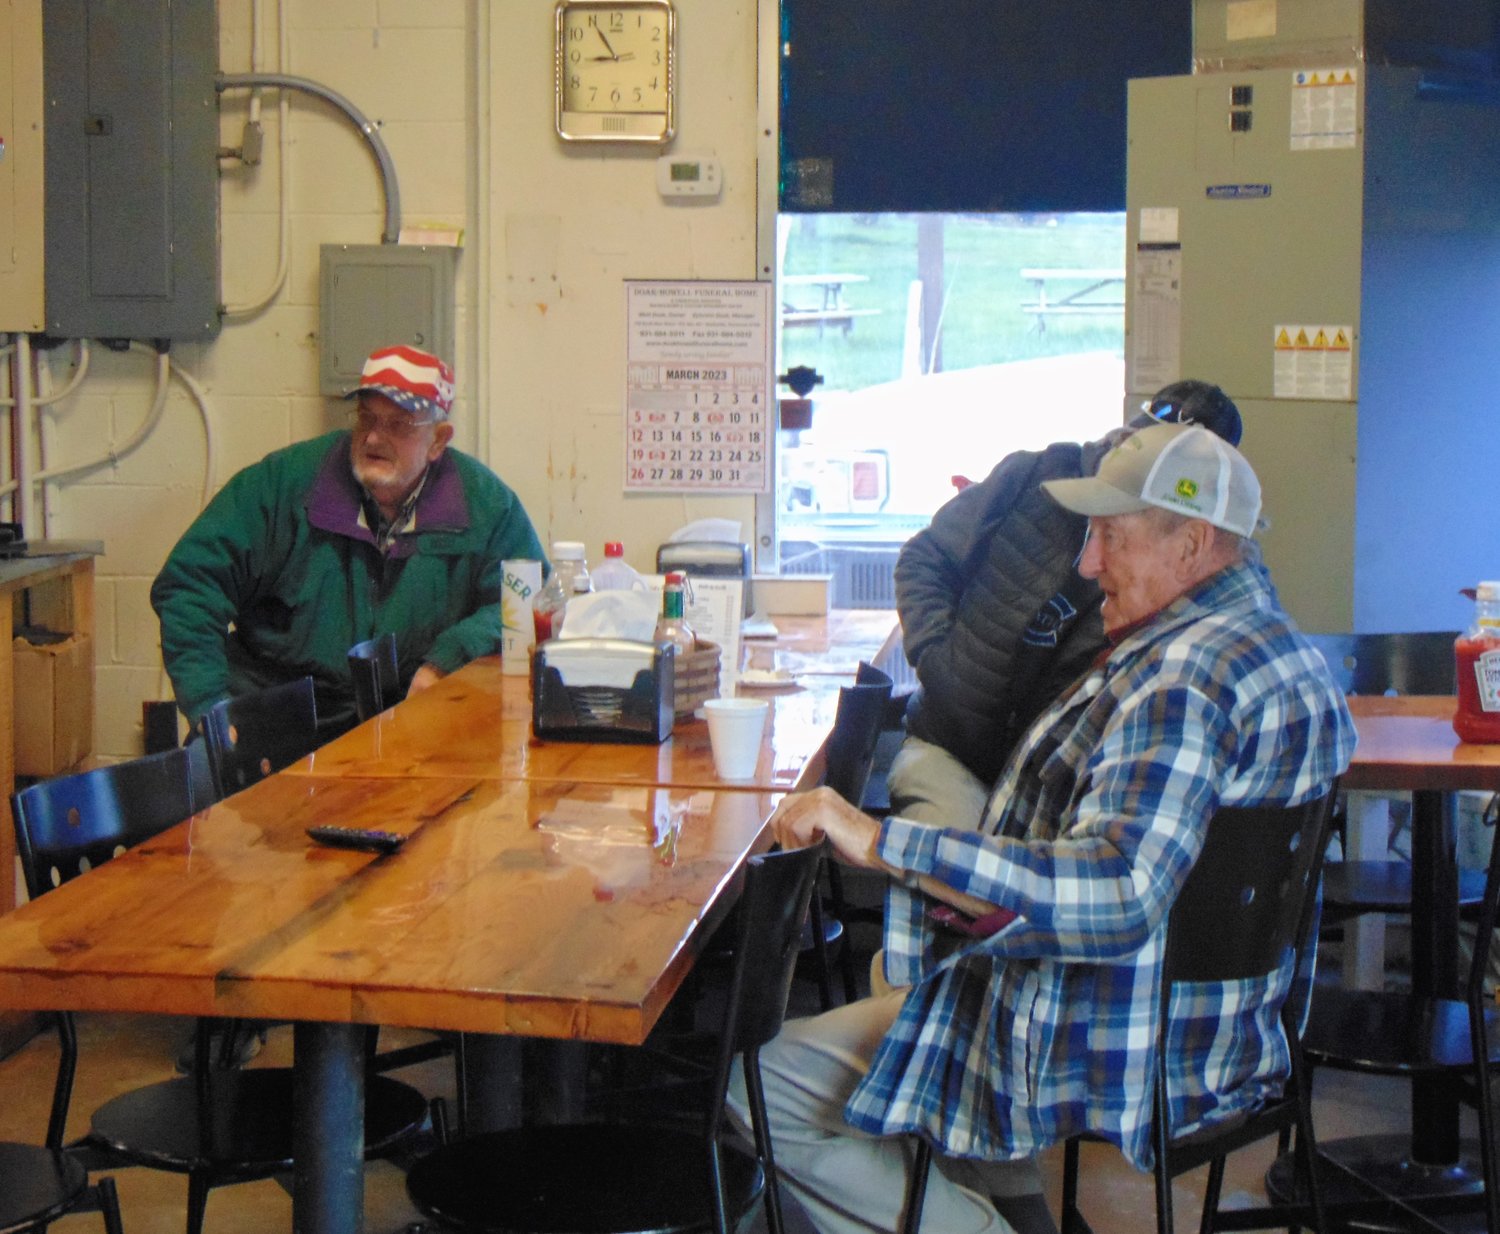 Some regulars enjoying their coffee on a chilly Monday morning.